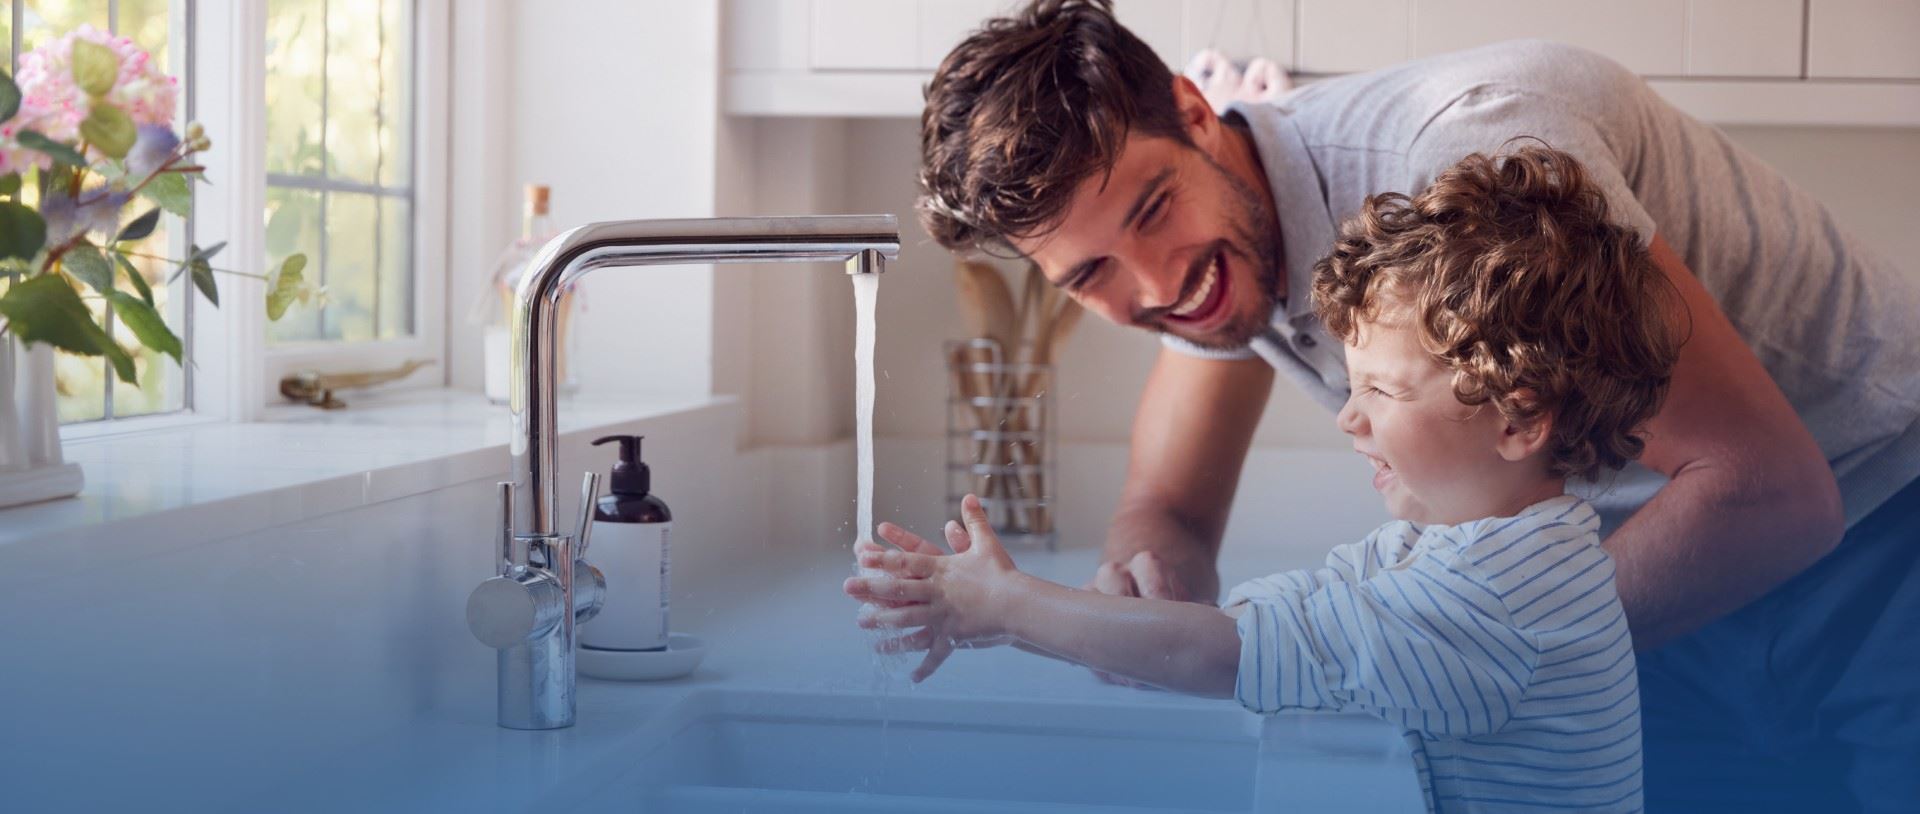 not all sinks are trustworthy. protect your children. — Do you